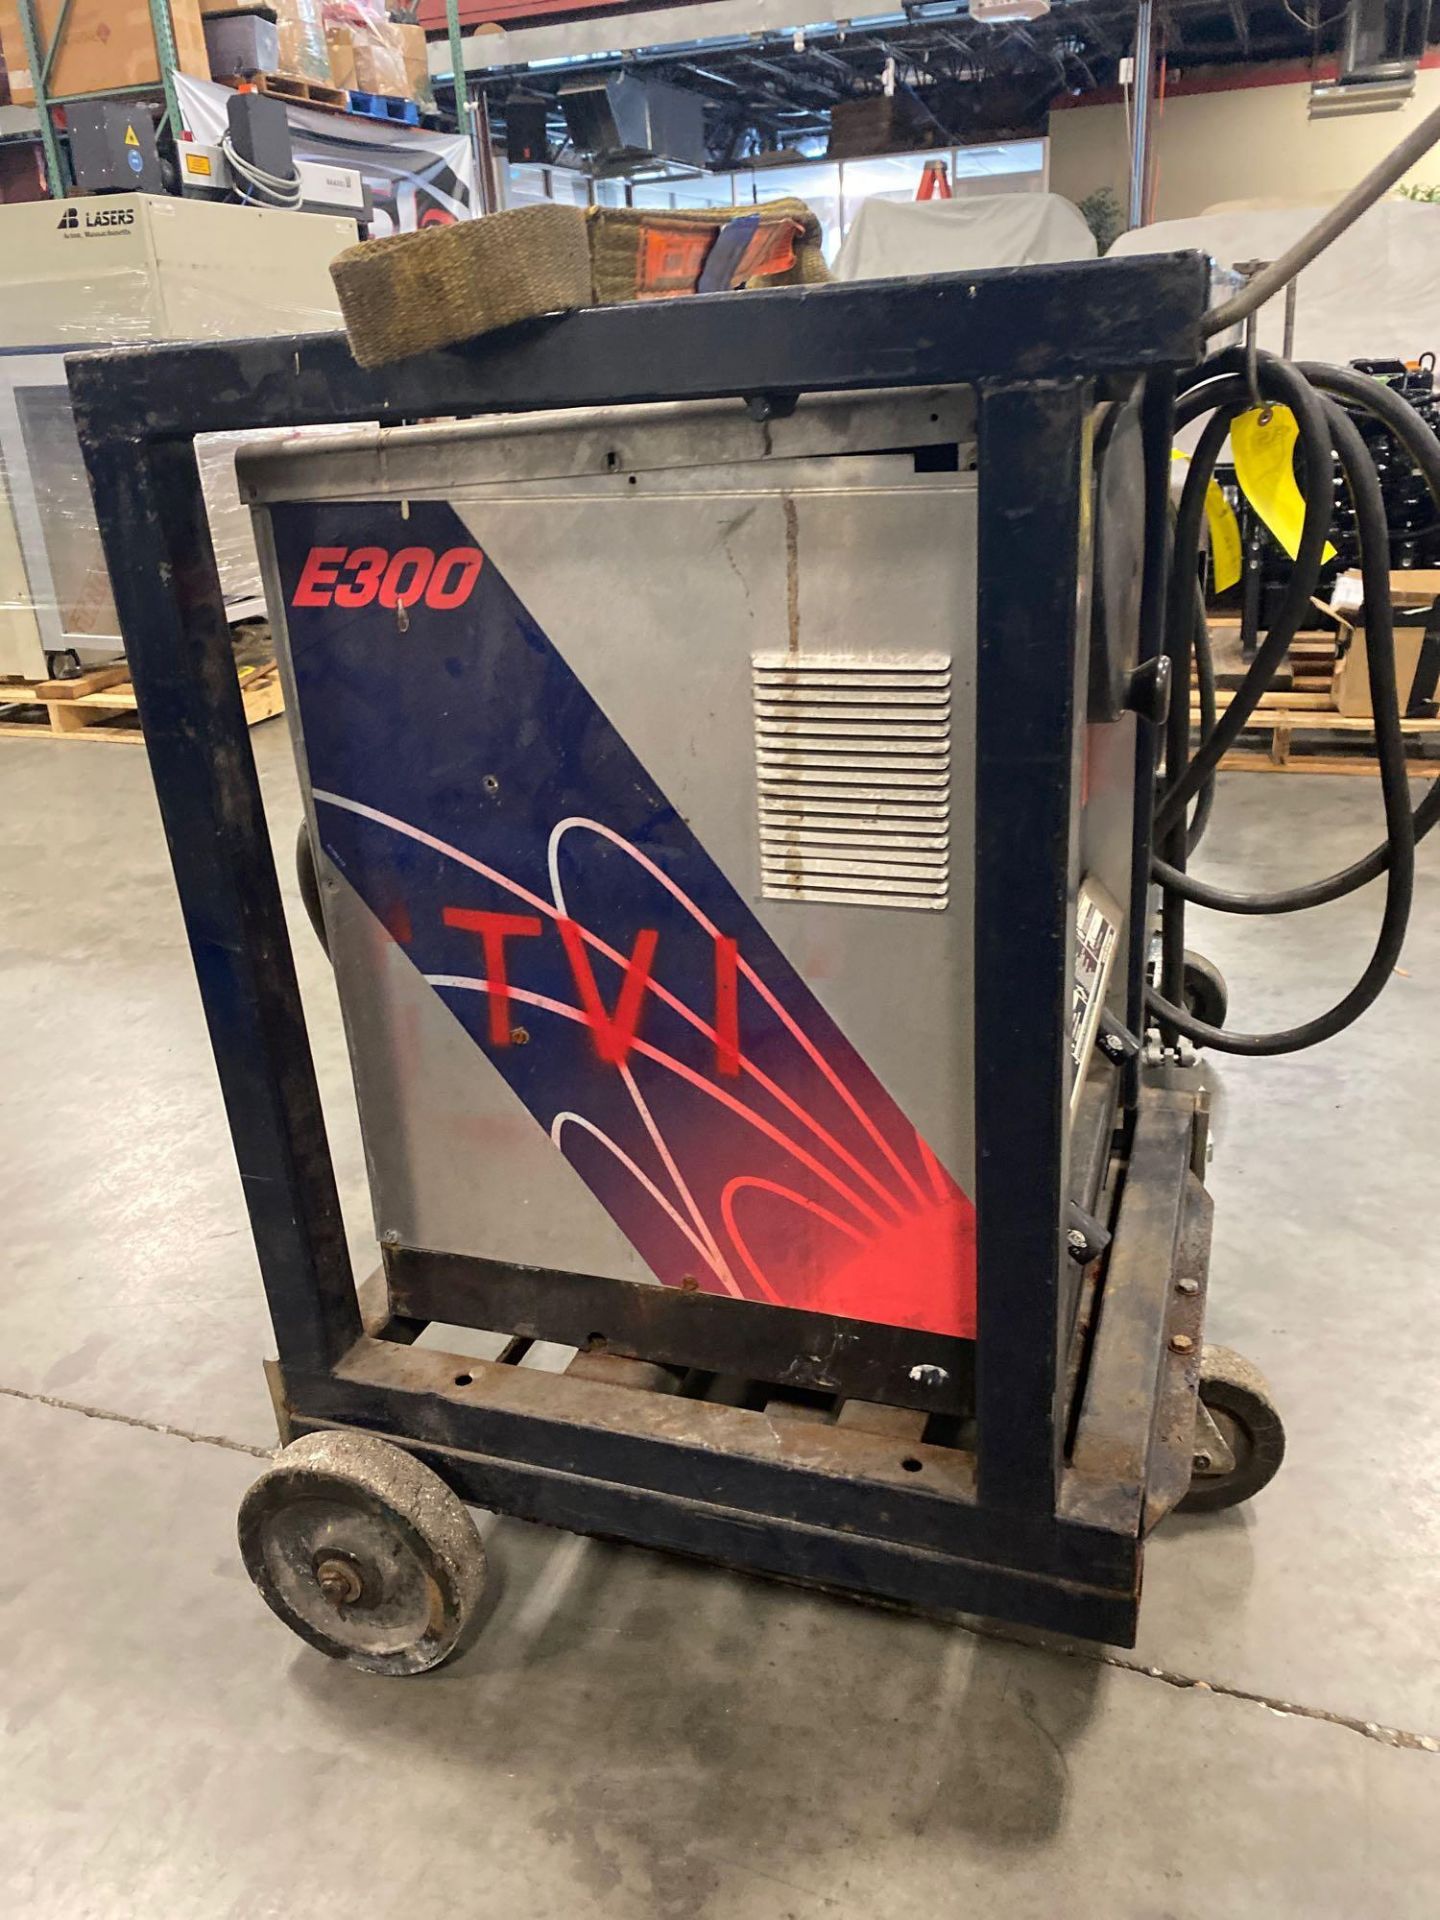 LINCOLN ELECTRIC E300 WELDER - Image 3 of 10